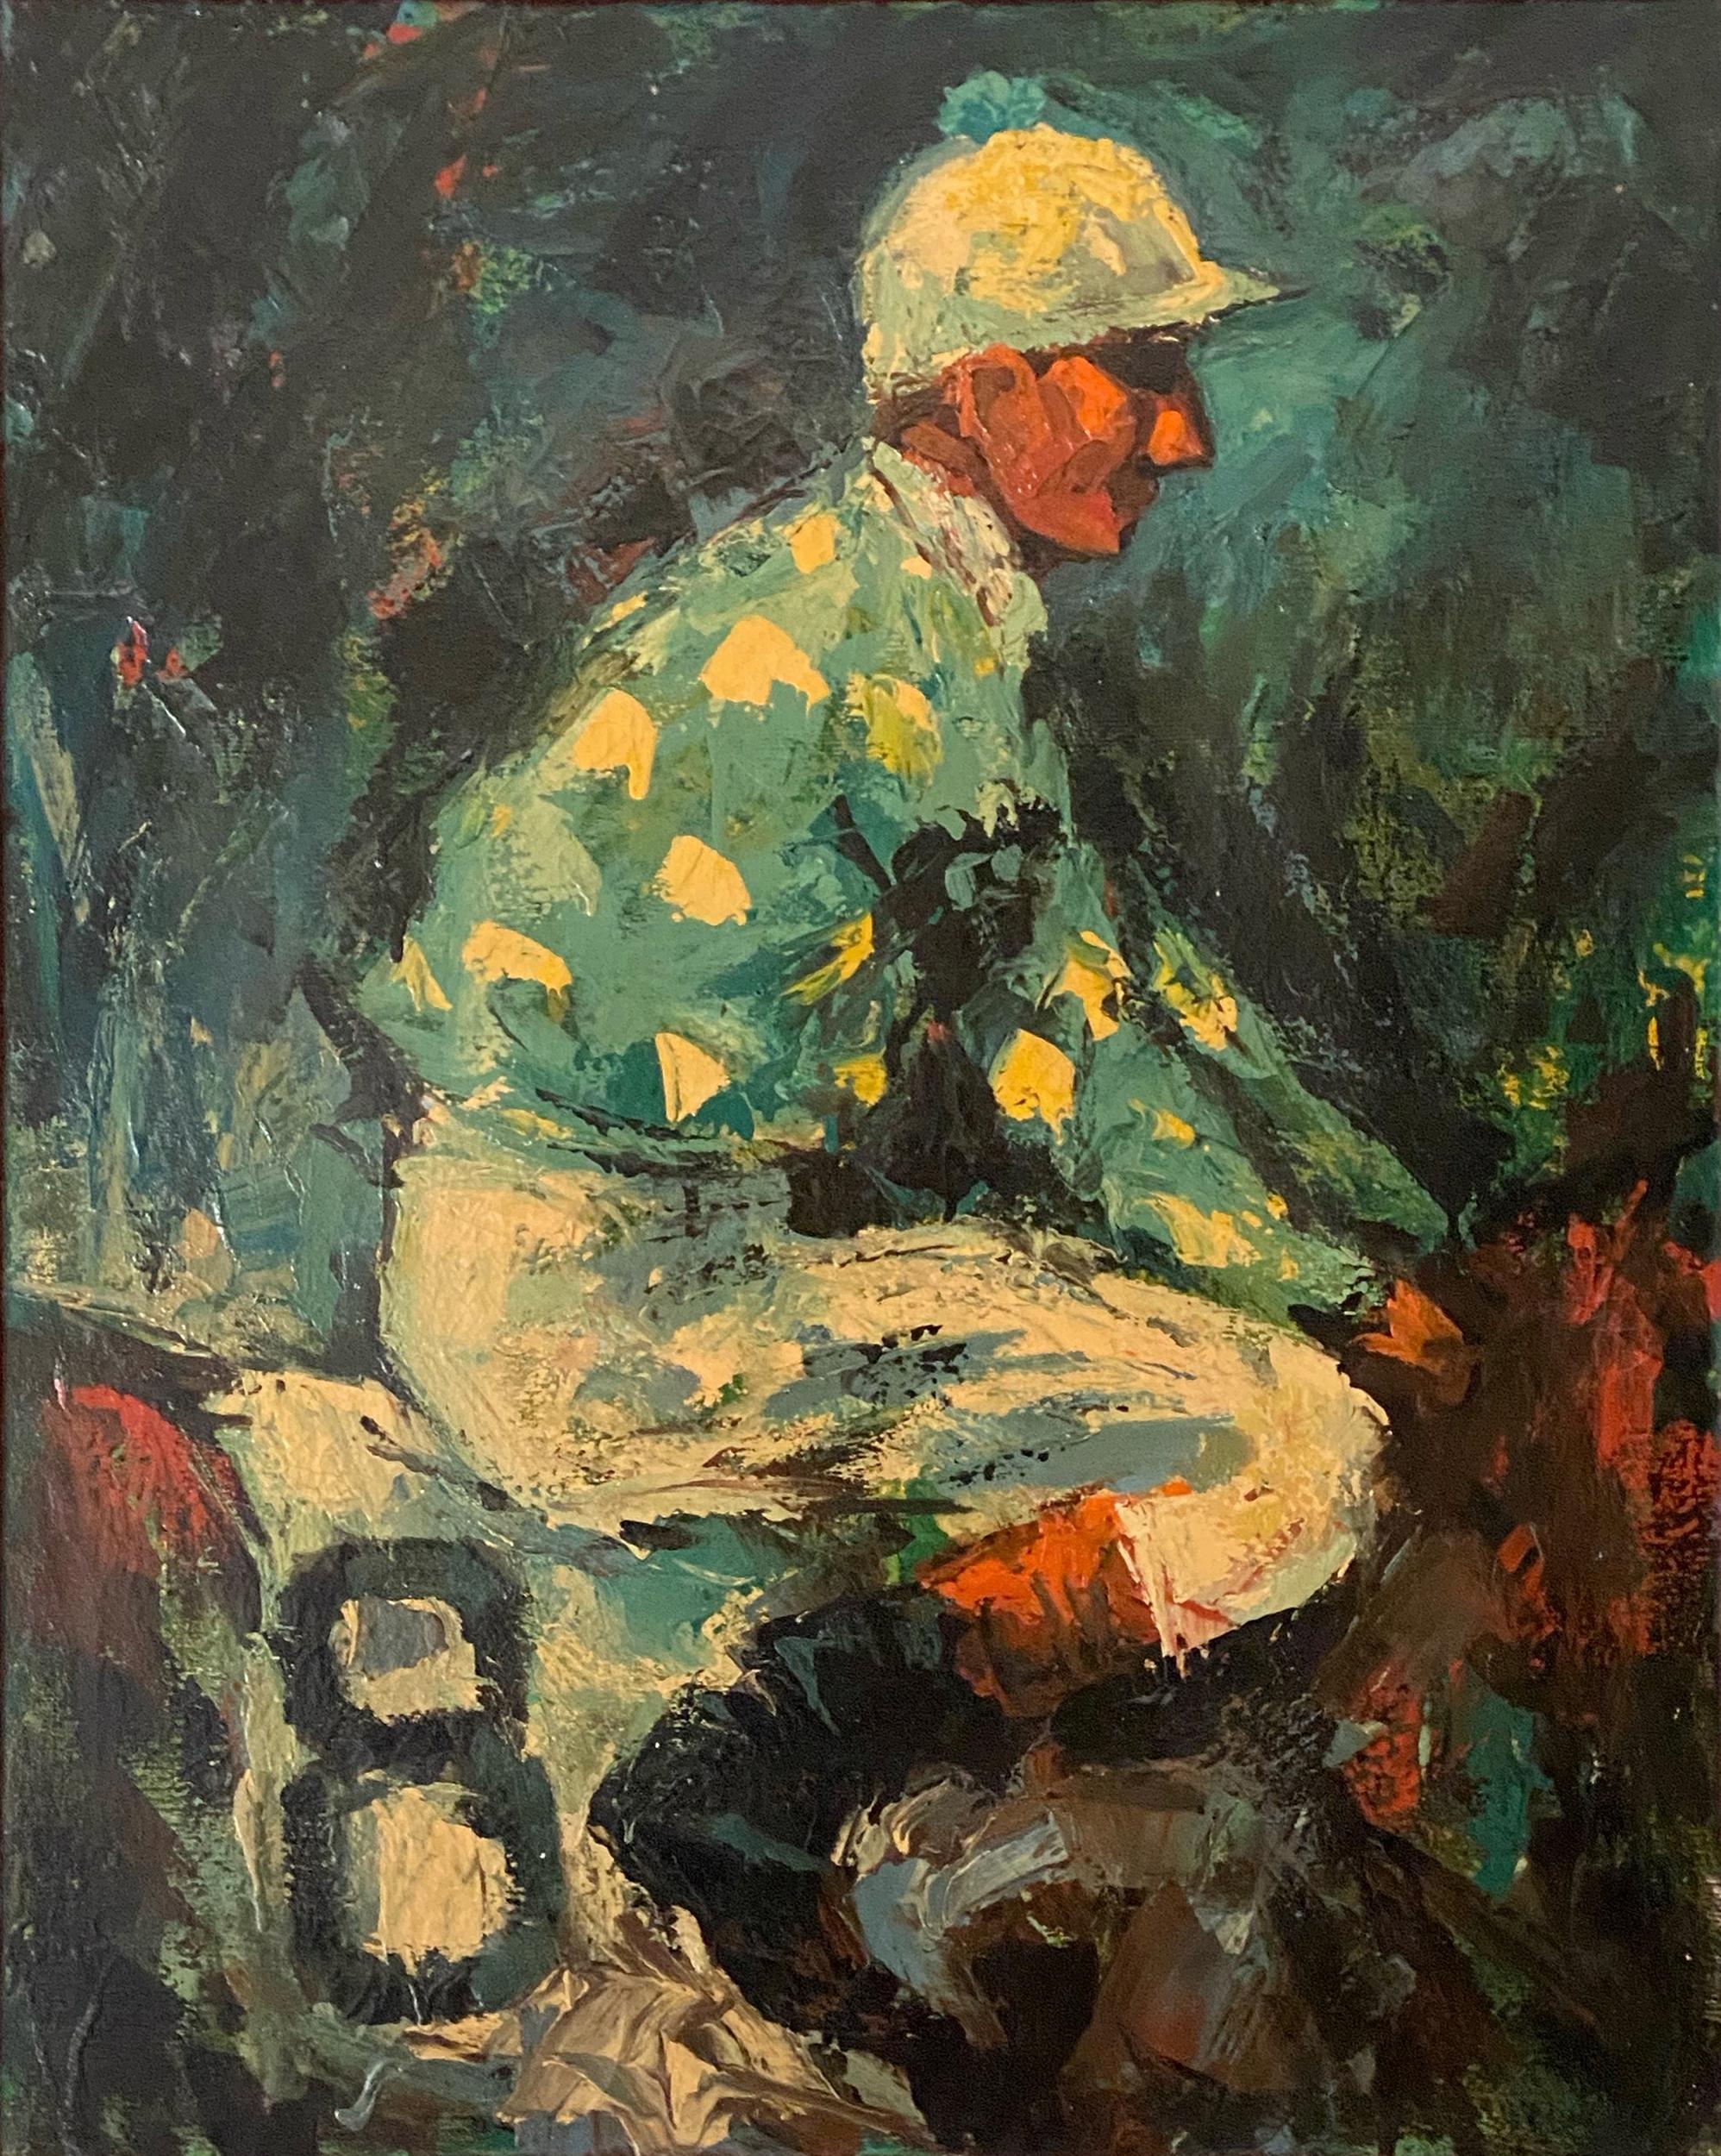 Green Jockey, Oil Painting on Canvas by Frank Rowland For Sale 1